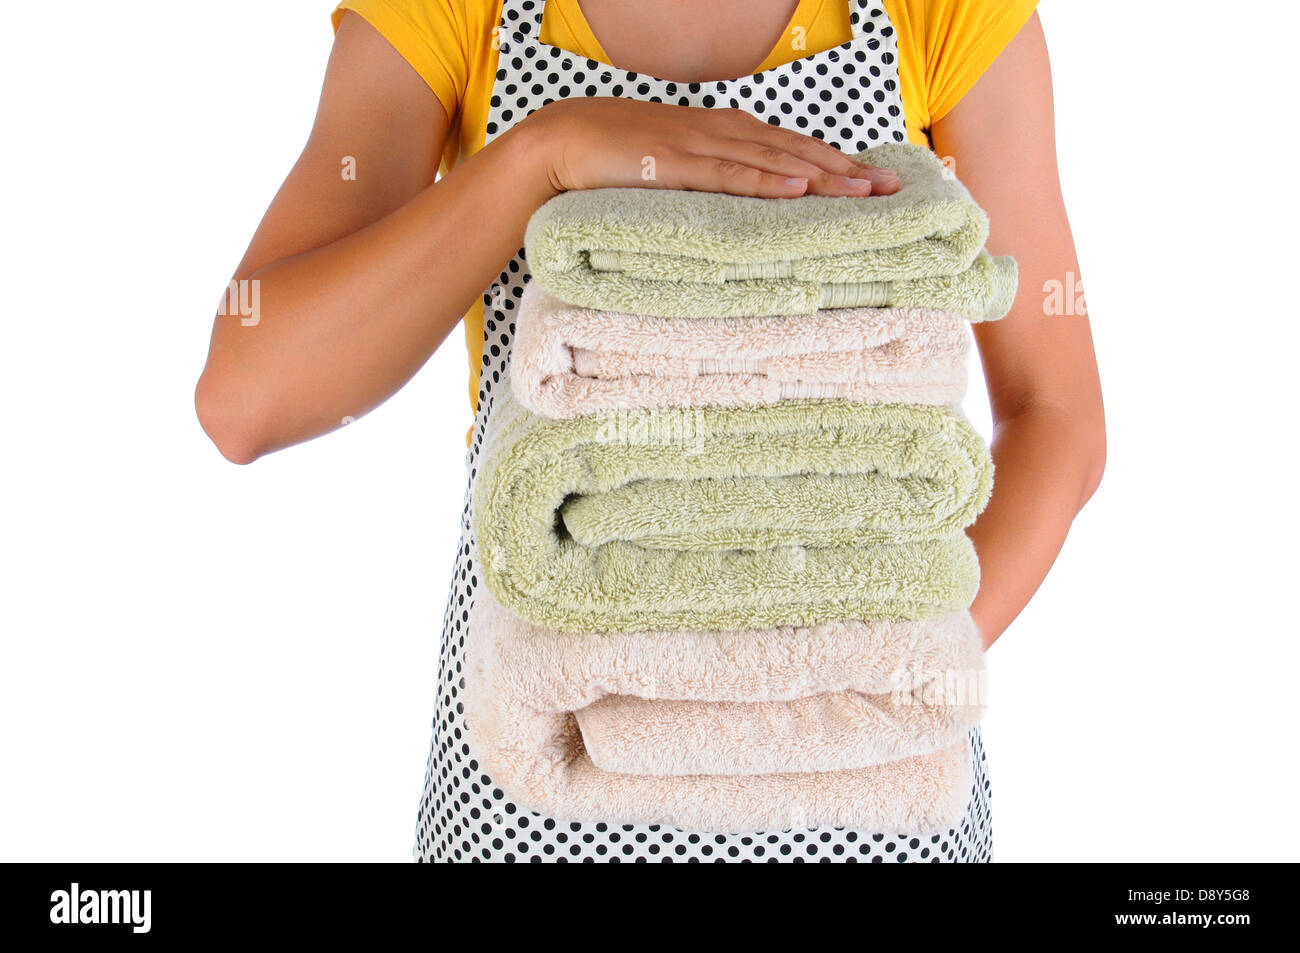 Closeup of a housewife holding a stack of freshly laundered towels. Woman is unrecognizable. Stock Photo